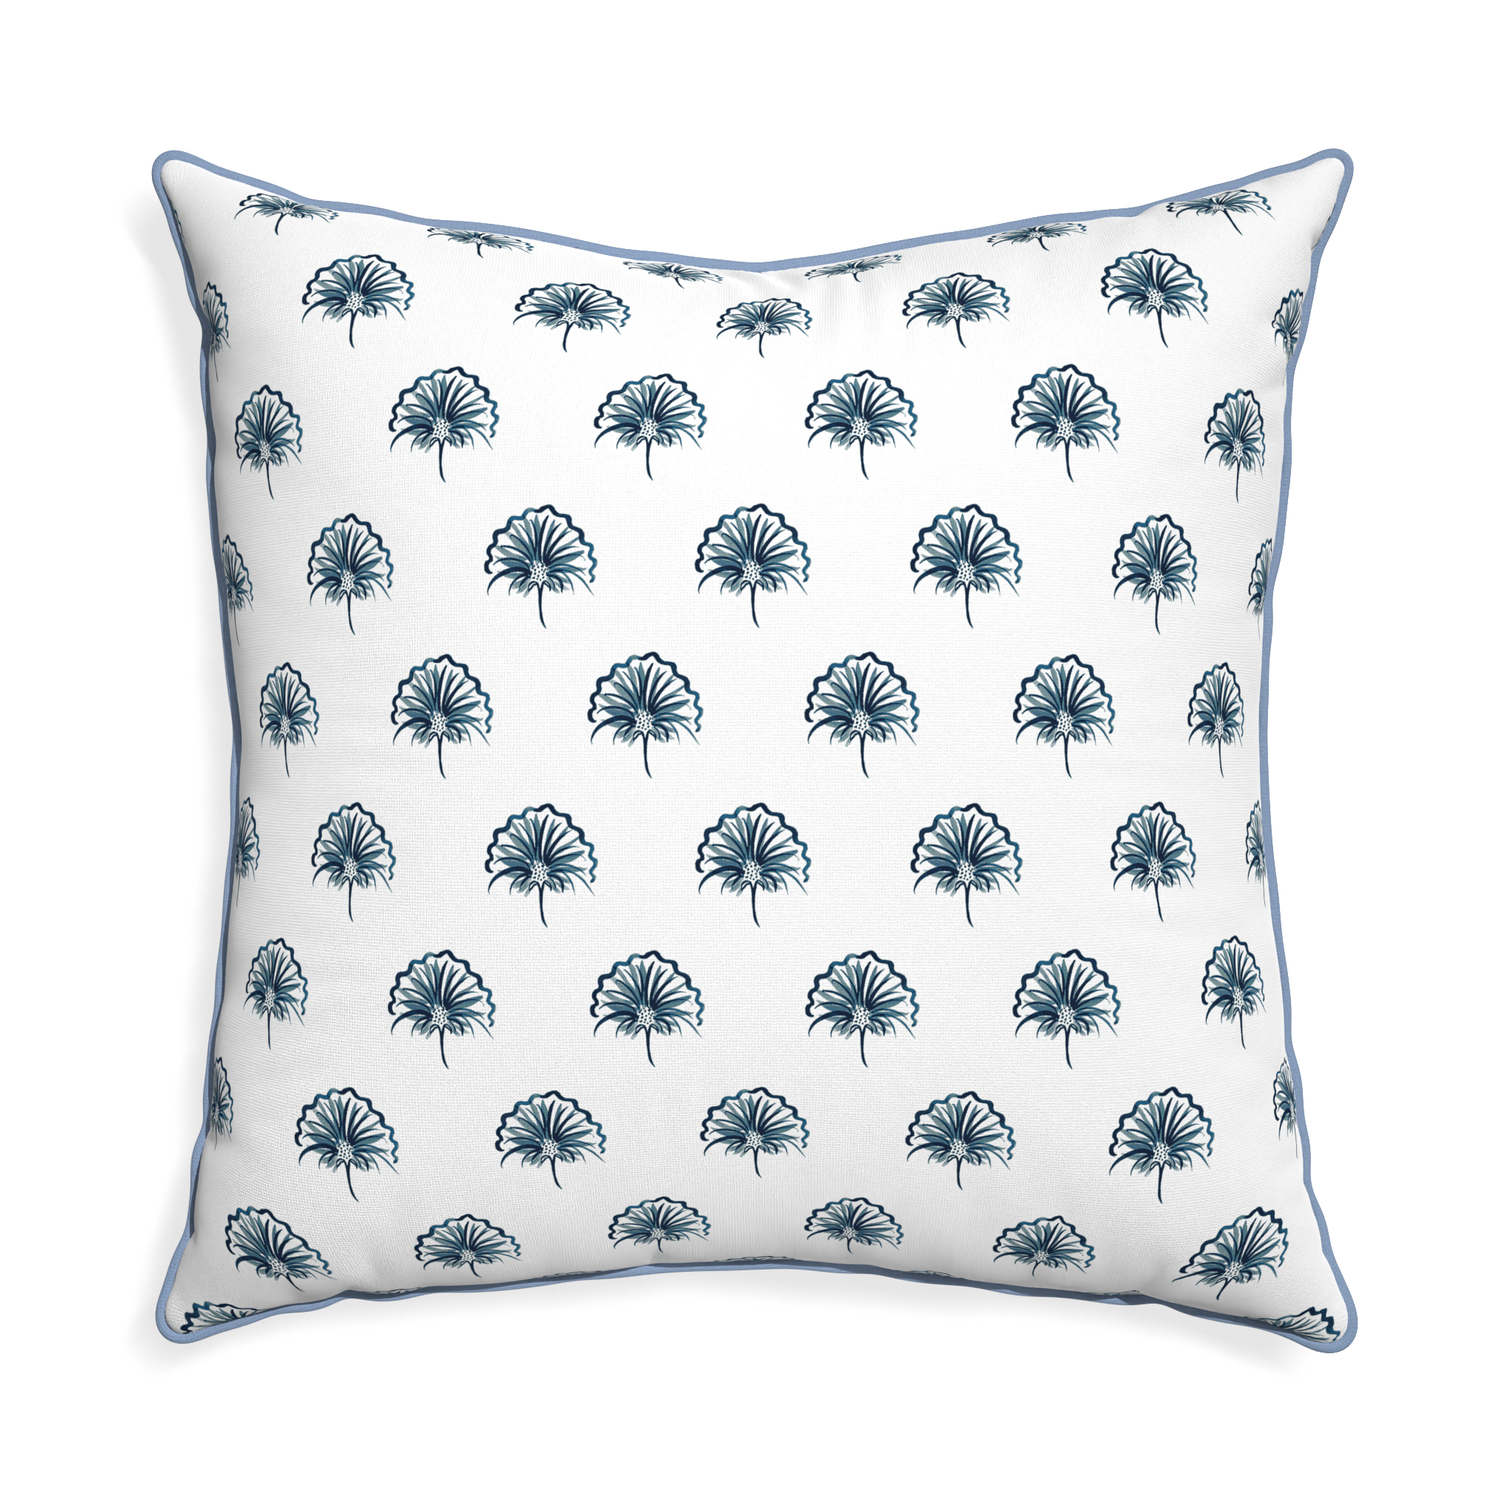 Euro-sham penelope midnight custom pillow with sky piping on white background